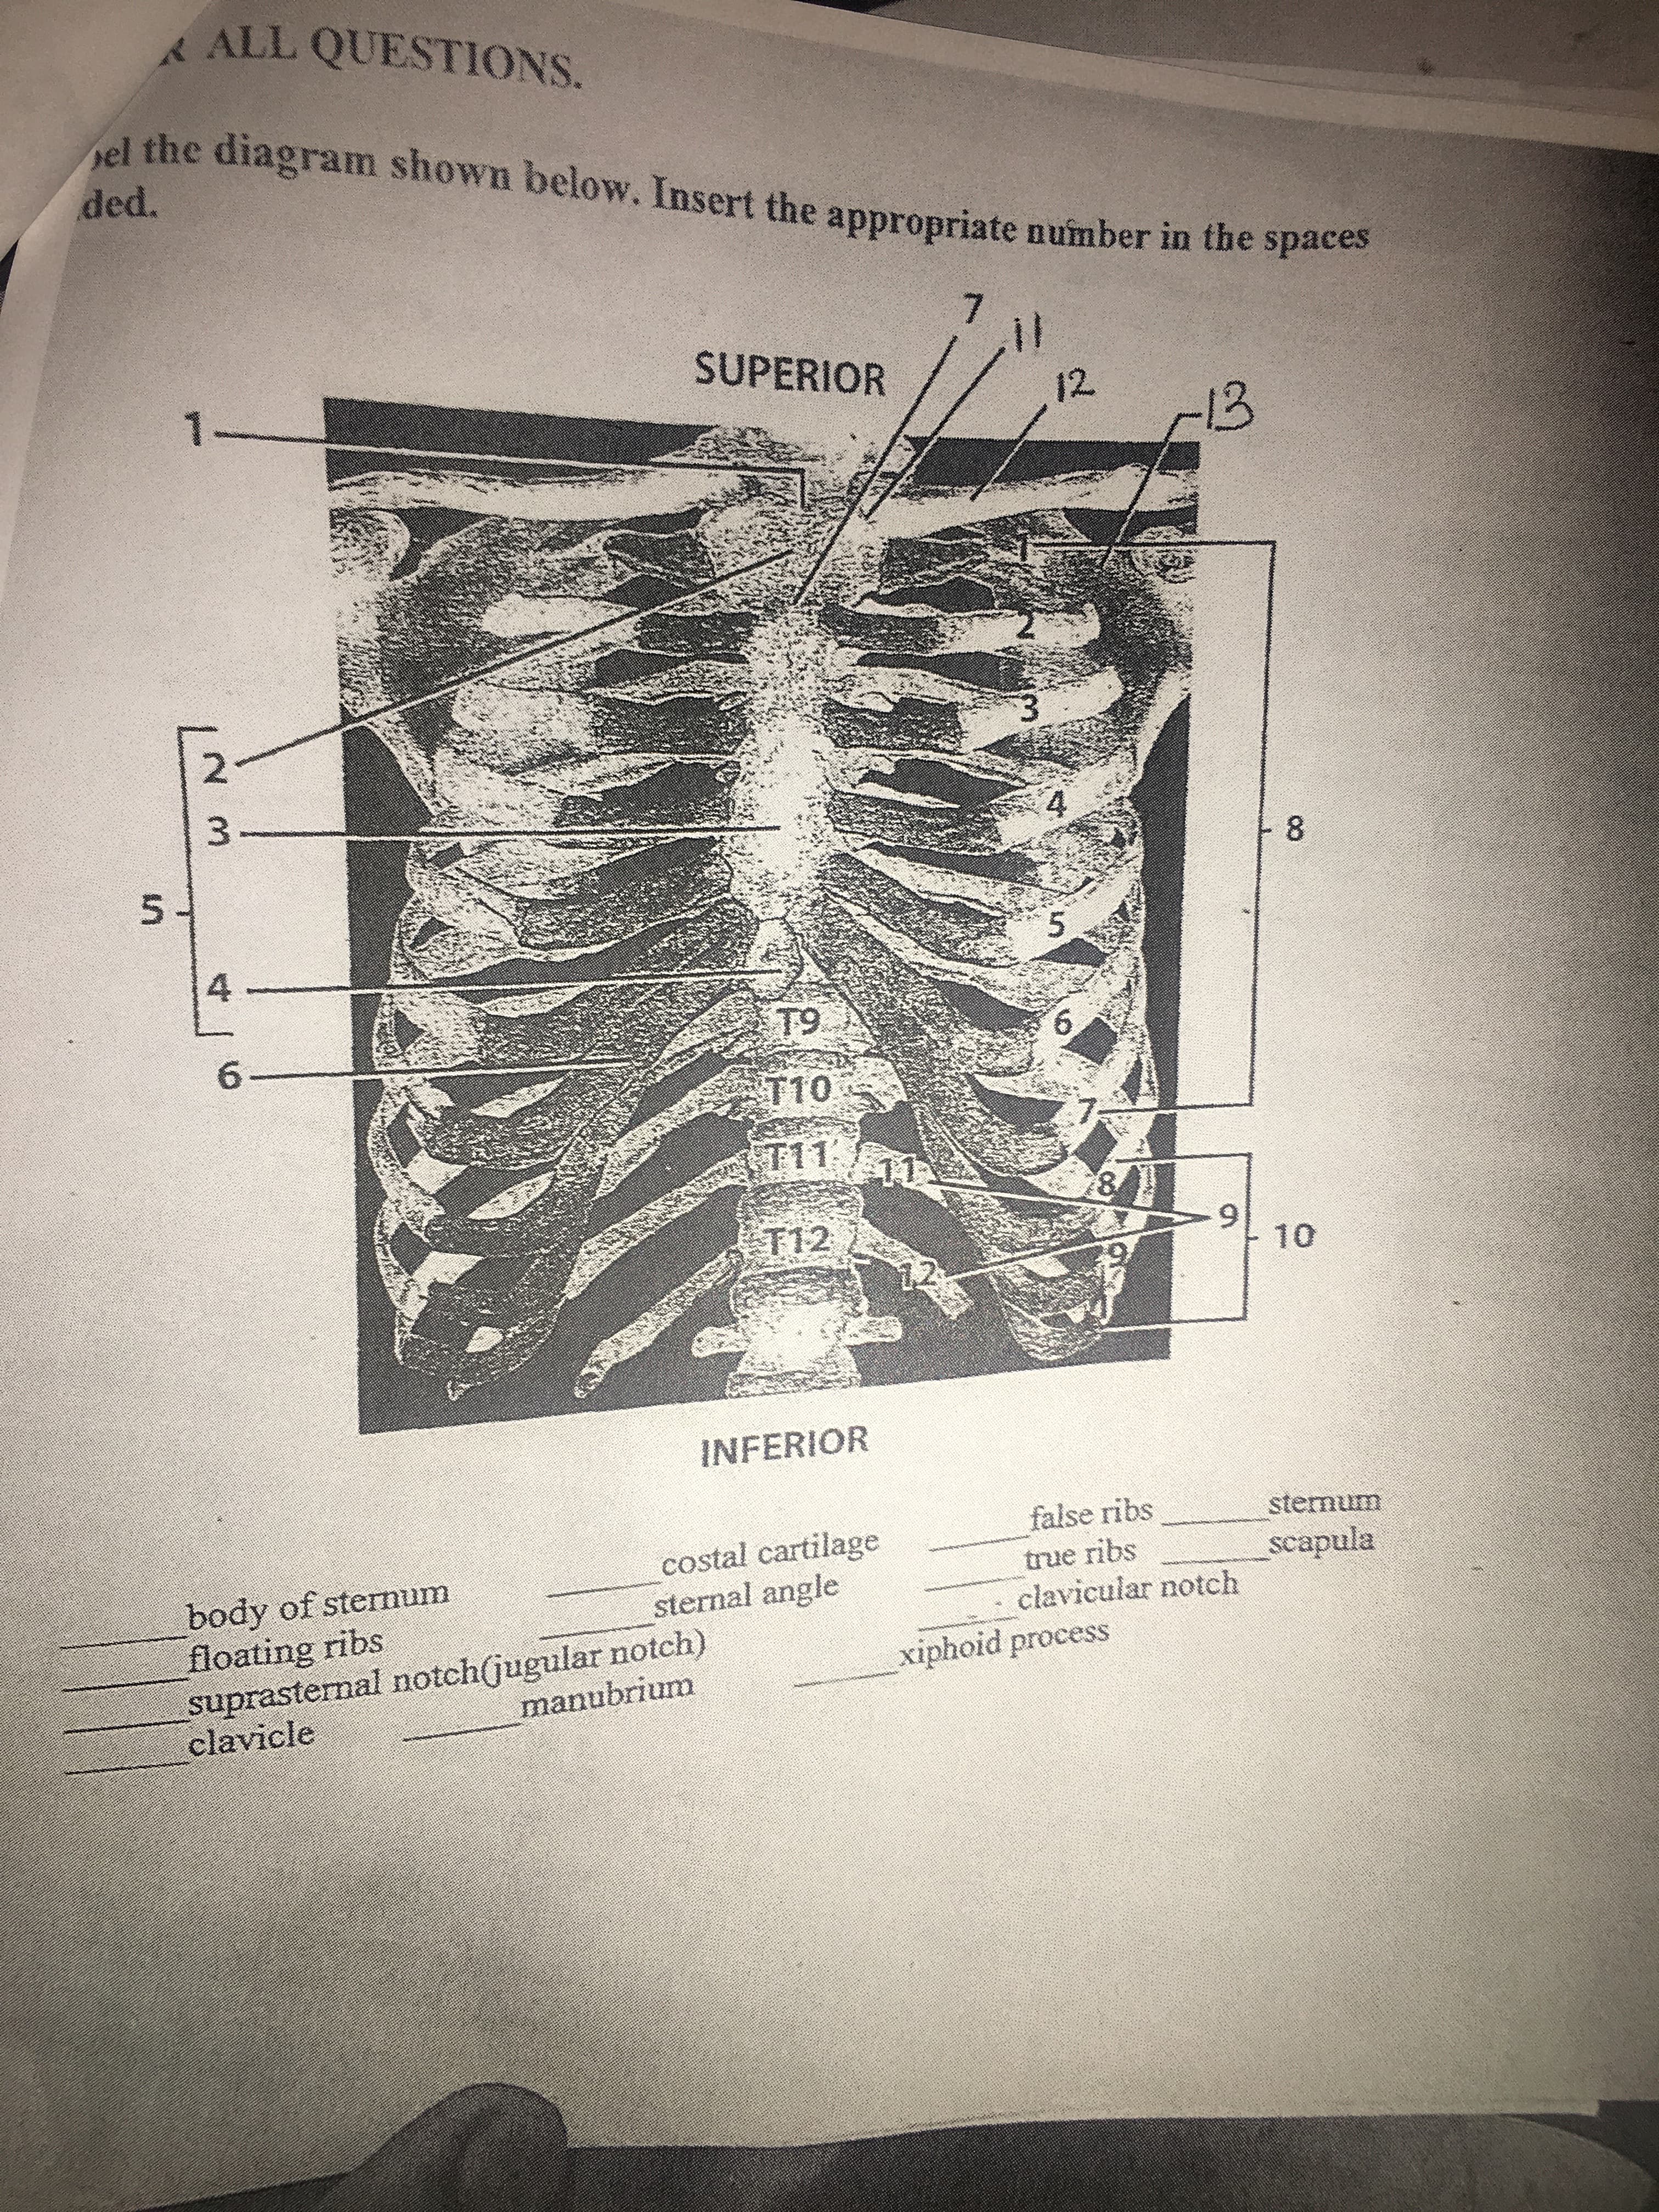 ALL QUESTIONS.
pel the diagram shown below. Insert the appropriate number in the spaces
ded.
7.
SUPERIOR
1.
12
13
3-
8.
T9
6-
T10
T11
8.
T12
12
10
INFERIOR
sternum
false ribs
costal cartilage
sternal angle
scapula
true ribs
clavicular notch
body of sternum
floating ribs
suprasternal notch(jugular notch)
clavicle
xiphoid process
manubrium
4.
